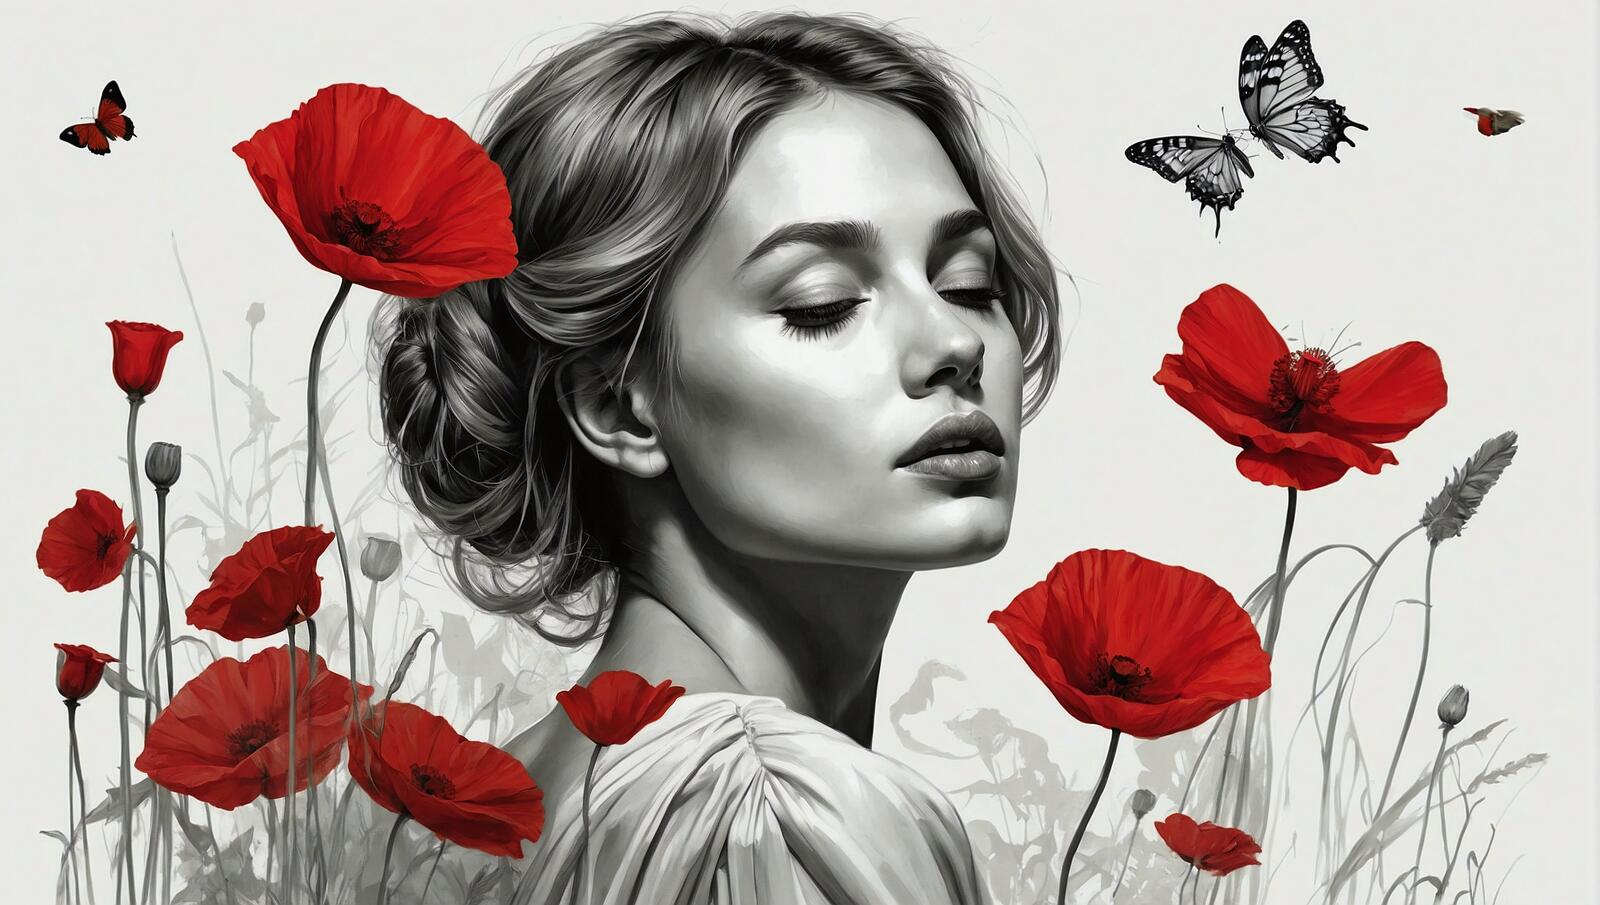 Free photo Illustration showing a woman surrounded by red flowers